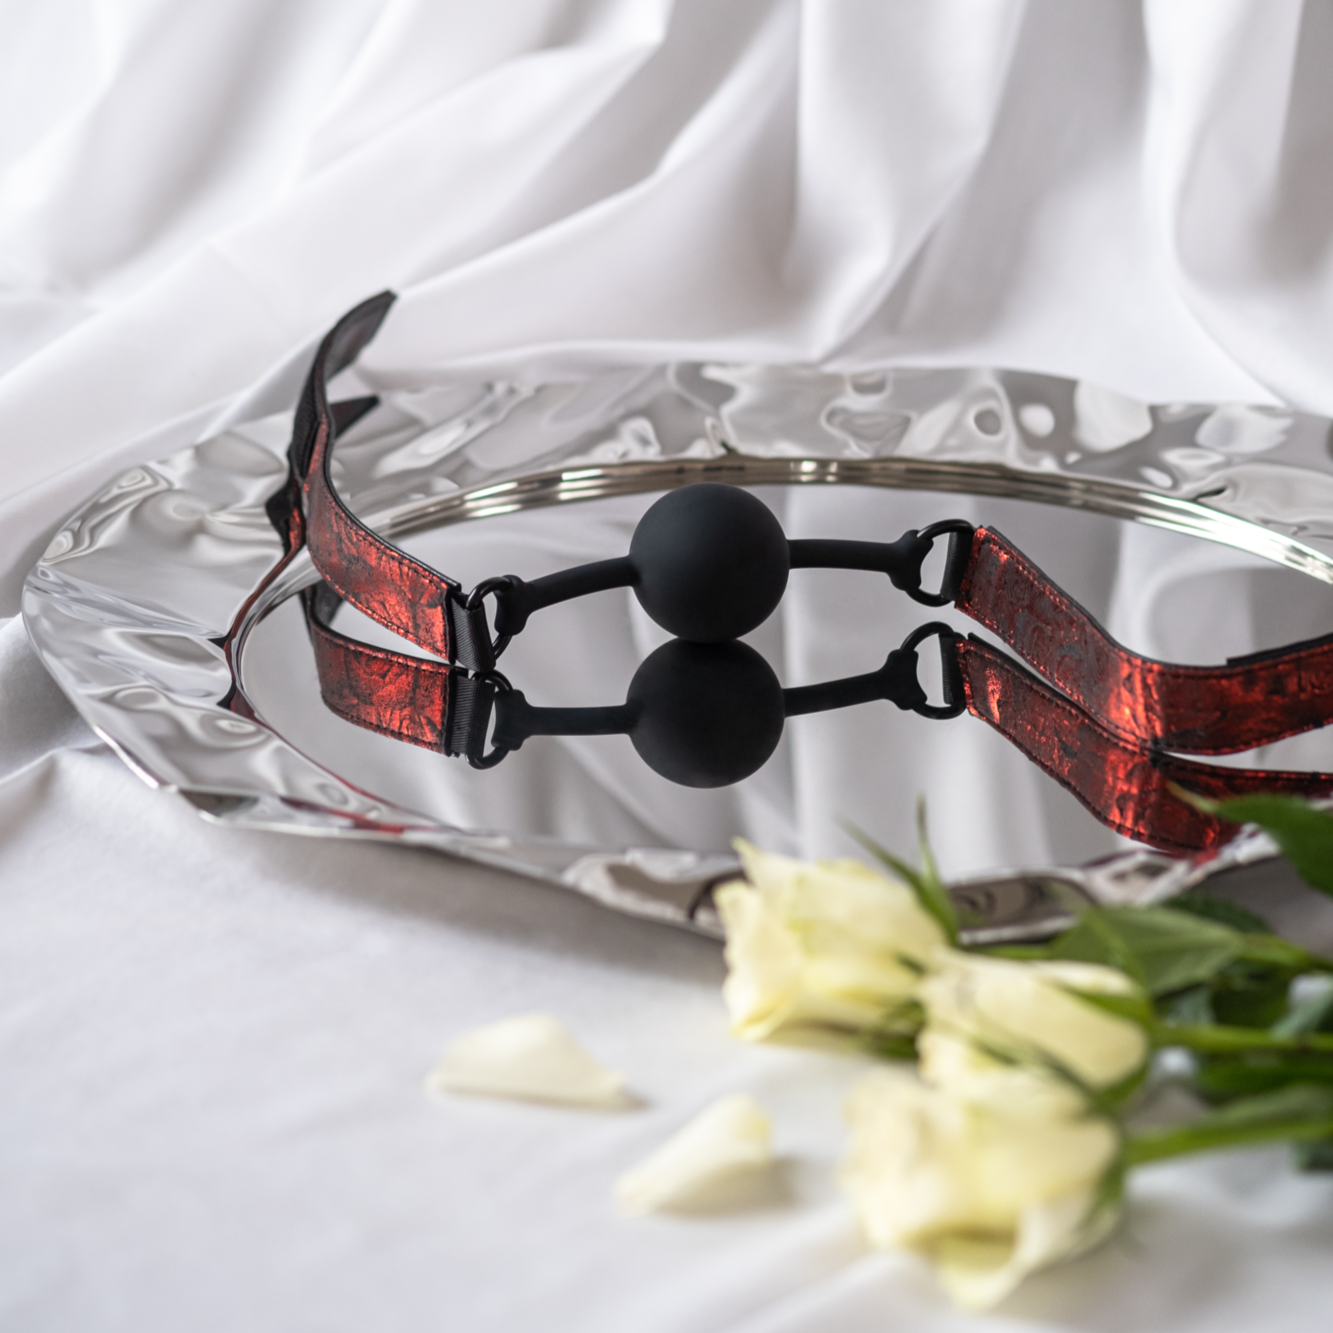 The Sweet Anticipation ball gag by Fifty Shades of Grey sits on a silver platter with flowers.